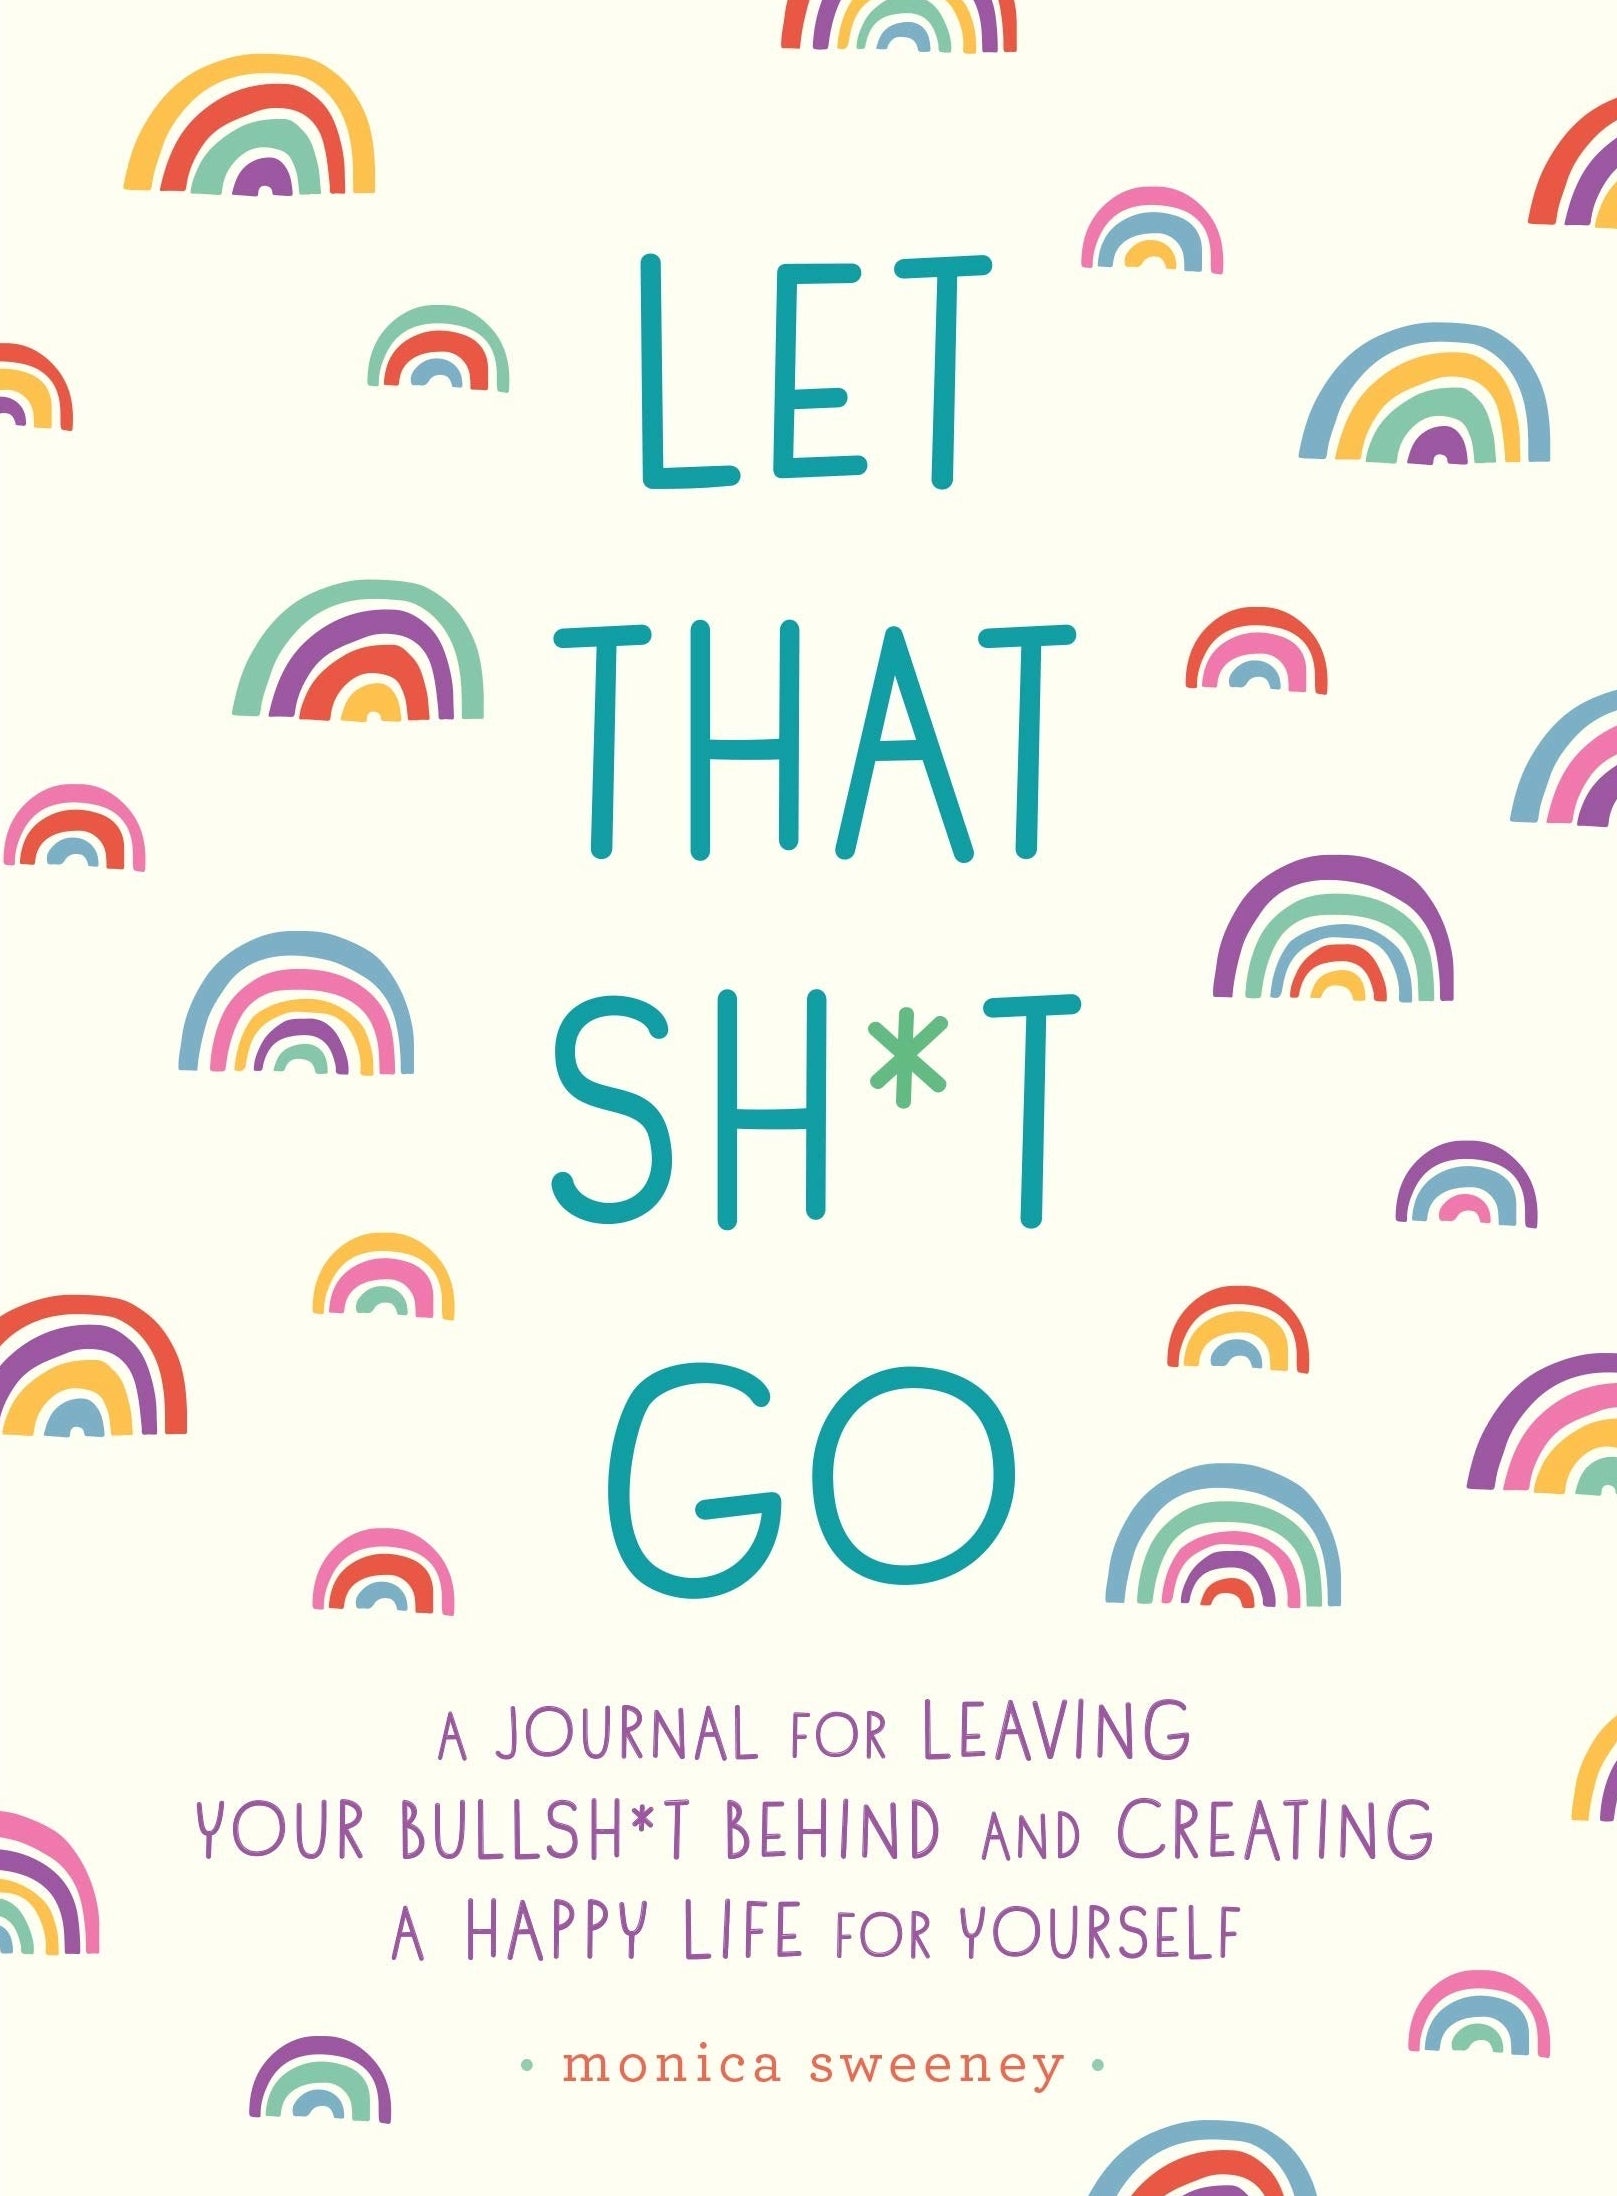 The cover of the book with little rainbows all over it